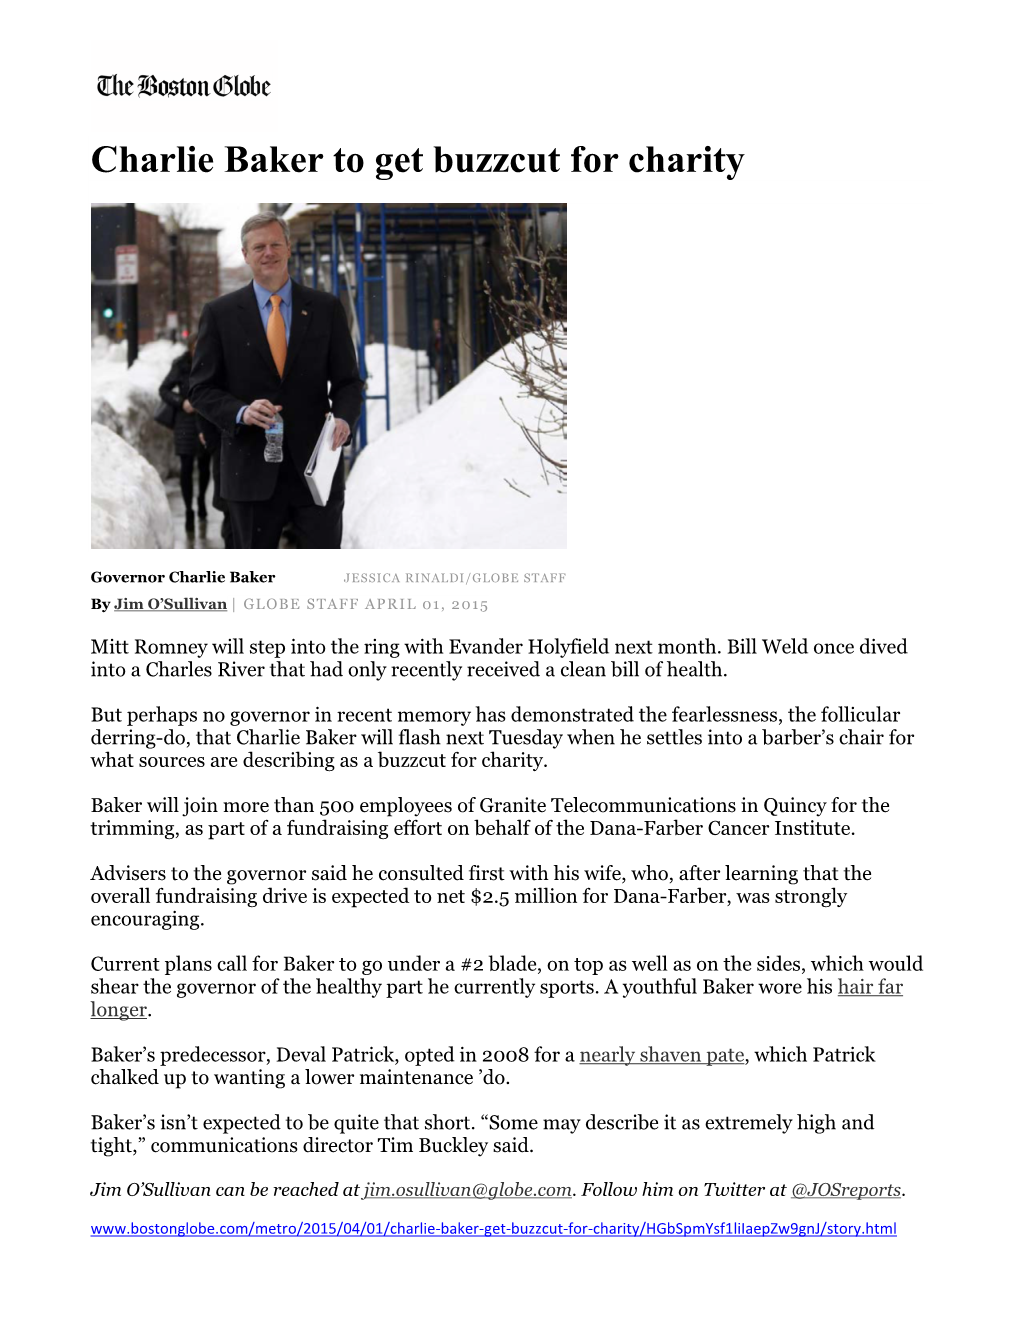 Charlie Baker to Get Buzzcut for Charity